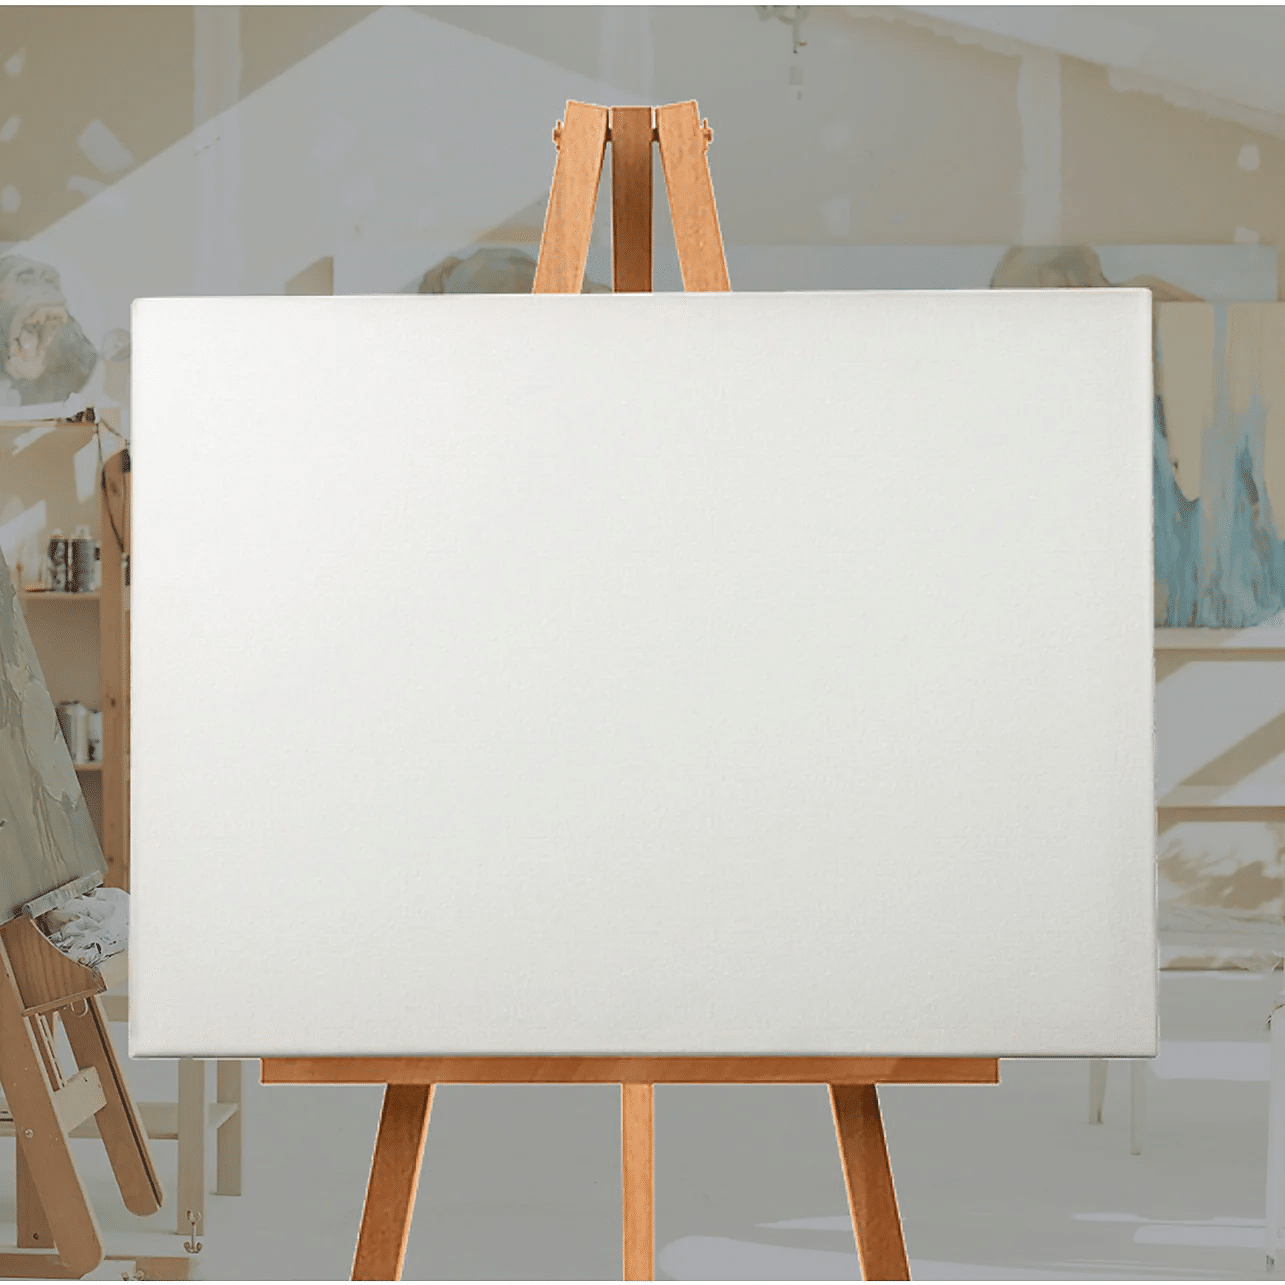 A white easel with a blank canvas, ready for artistic creation. Set up a canvas board for your artistic endeavors